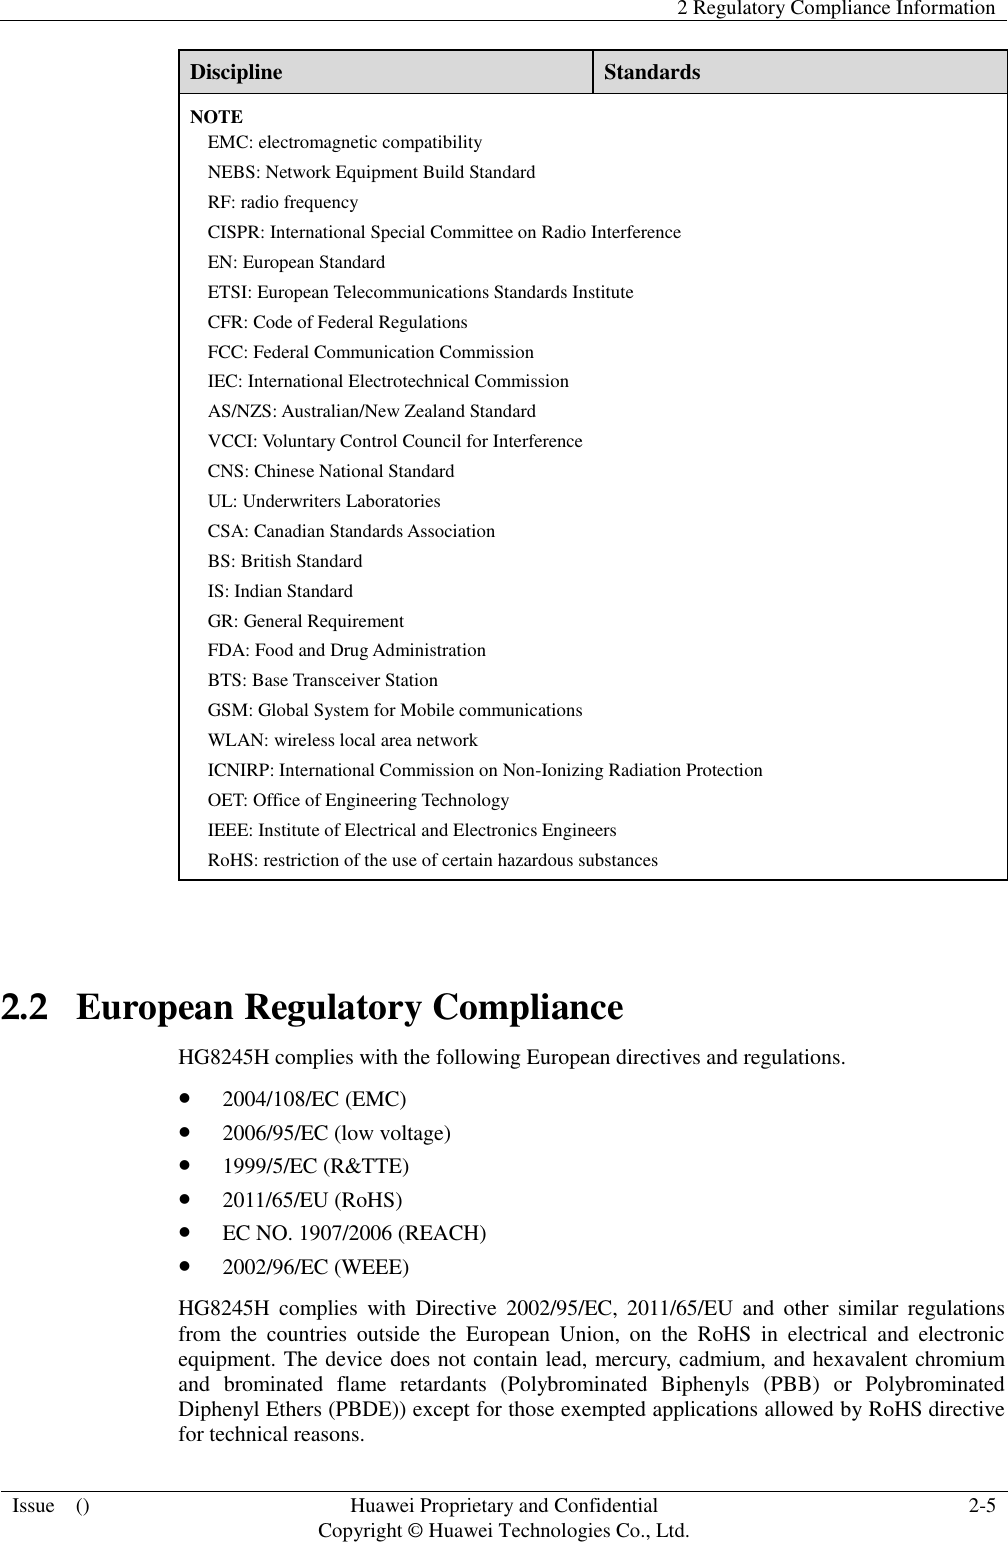   2 Regulatory Compliance Information  Issue    () Huawei Proprietary and Confidential                                     Copyright © Huawei Technologies Co., Ltd. 2-5  Discipline Standards NOTE EMC: electromagnetic compatibility NEBS: Network Equipment Build Standard RF: radio frequency CISPR: International Special Committee on Radio Interference EN: European Standard ETSI: European Telecommunications Standards Institute CFR: Code of Federal Regulations FCC: Federal Communication Commission IEC: International Electrotechnical Commission AS/NZS: Australian/New Zealand Standard VCCI: Voluntary Control Council for Interference CNS: Chinese National Standard UL: Underwriters Laboratories CSA: Canadian Standards Association BS: British Standard IS: Indian Standard GR: General Requirement FDA: Food and Drug Administration BTS: Base Transceiver Station GSM: Global System for Mobile communications WLAN: wireless local area network ICNIRP: International Commission on Non-Ionizing Radiation Protection OET: Office of Engineering Technology IEEE: Institute of Electrical and Electronics Engineers RoHS: restriction of the use of certain hazardous substances  2.2   European Regulatory Compliance HG8245H complies with the following European directives and regulations.  2004/108/EC (EMC)  2006/95/EC (low voltage)  1999/5/EC (R&amp;TTE)  2011/65/EU (RoHS)  EC NO. 1907/2006 (REACH)  2002/96/EC (WEEE) HG8245H  complies  with  Directive  2002/95/EC,  2011/65/EU  and  other  similar  regulations from  the  countries  outside  the  European  Union,  on  the  RoHS  in  electrical  and  electronic equipment. The device does not contain lead, mercury, cadmium, and hexavalent chromium and  brominated  flame  retardants  (Polybrominated  Biphenyls  (PBB)  or  Polybrominated Diphenyl Ethers (PBDE)) except for those exempted applications allowed by RoHS directive for technical reasons.   